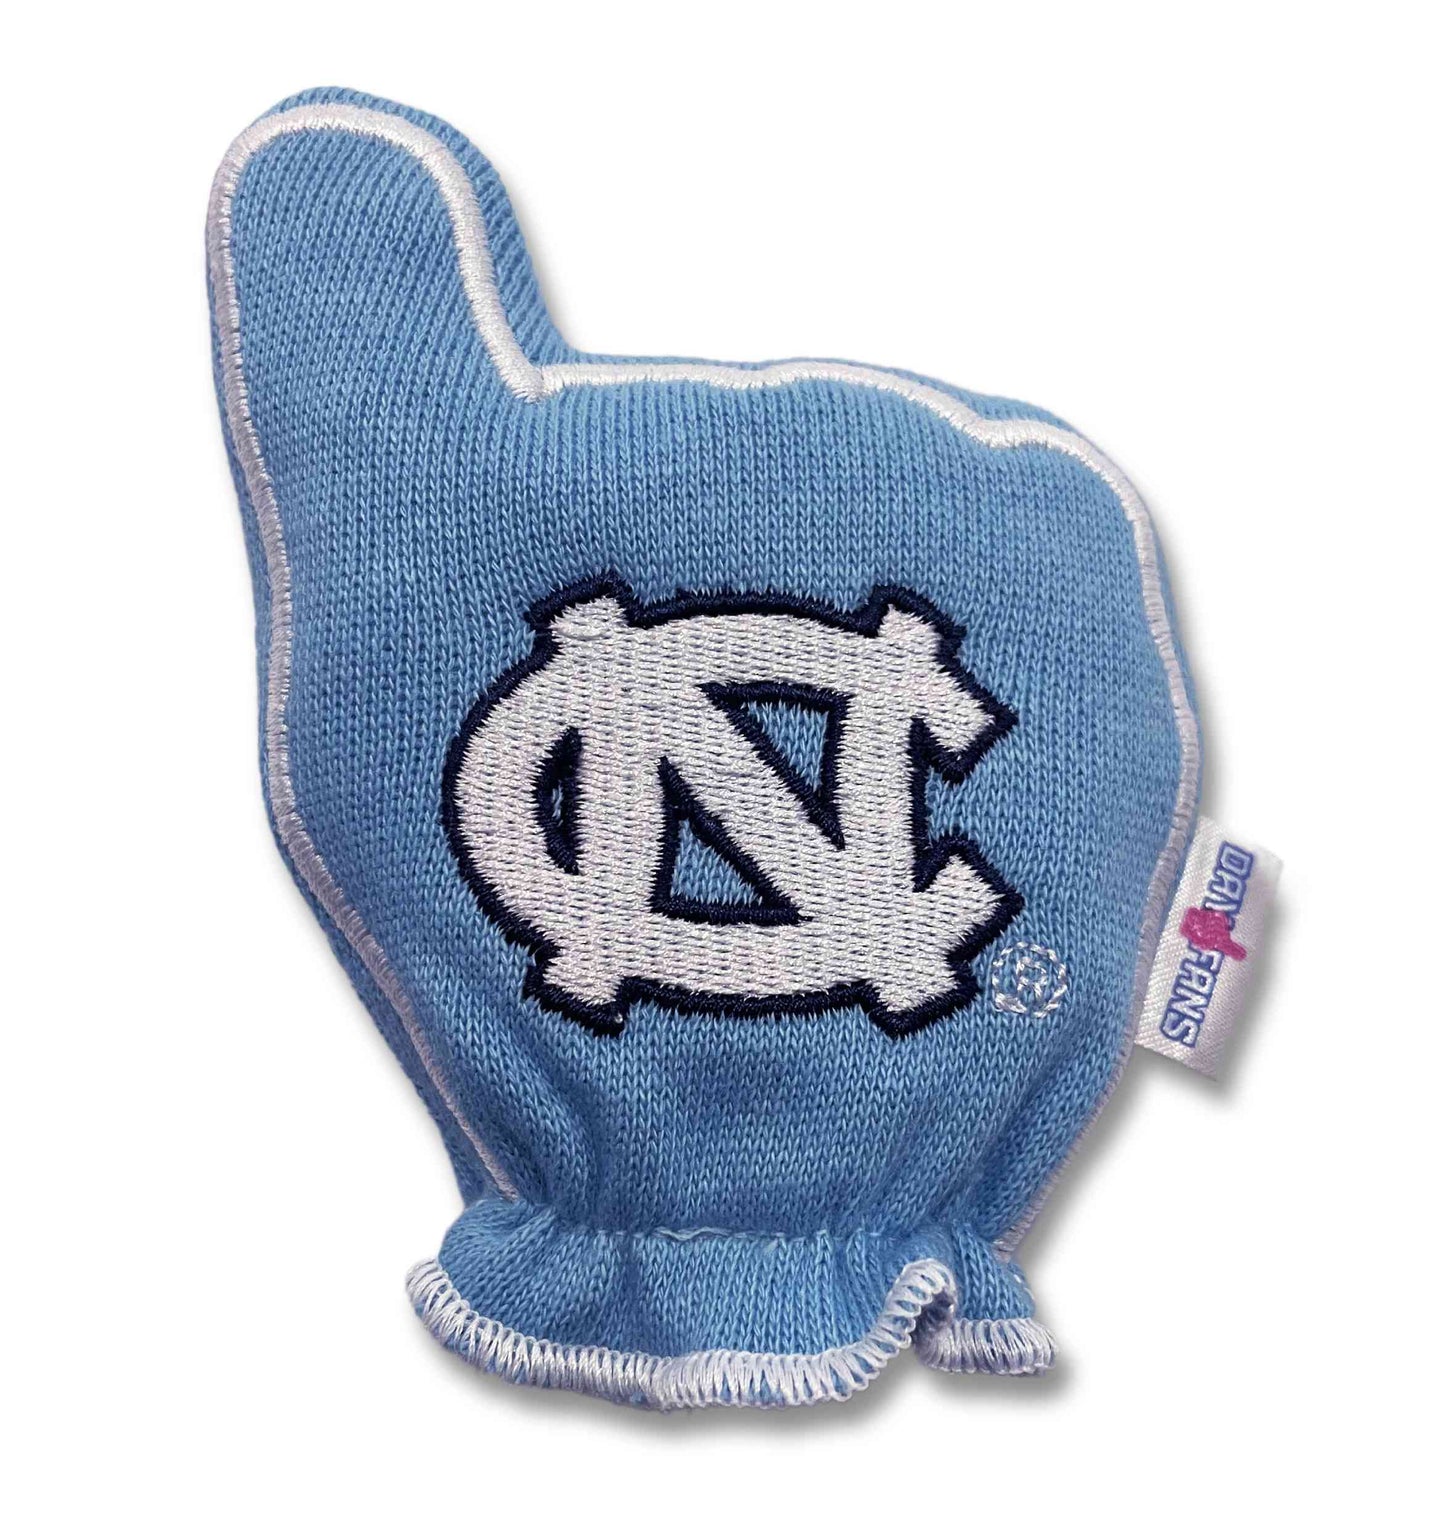 North Carolina Go Heels FanMitts Baby Mittens Blue Back